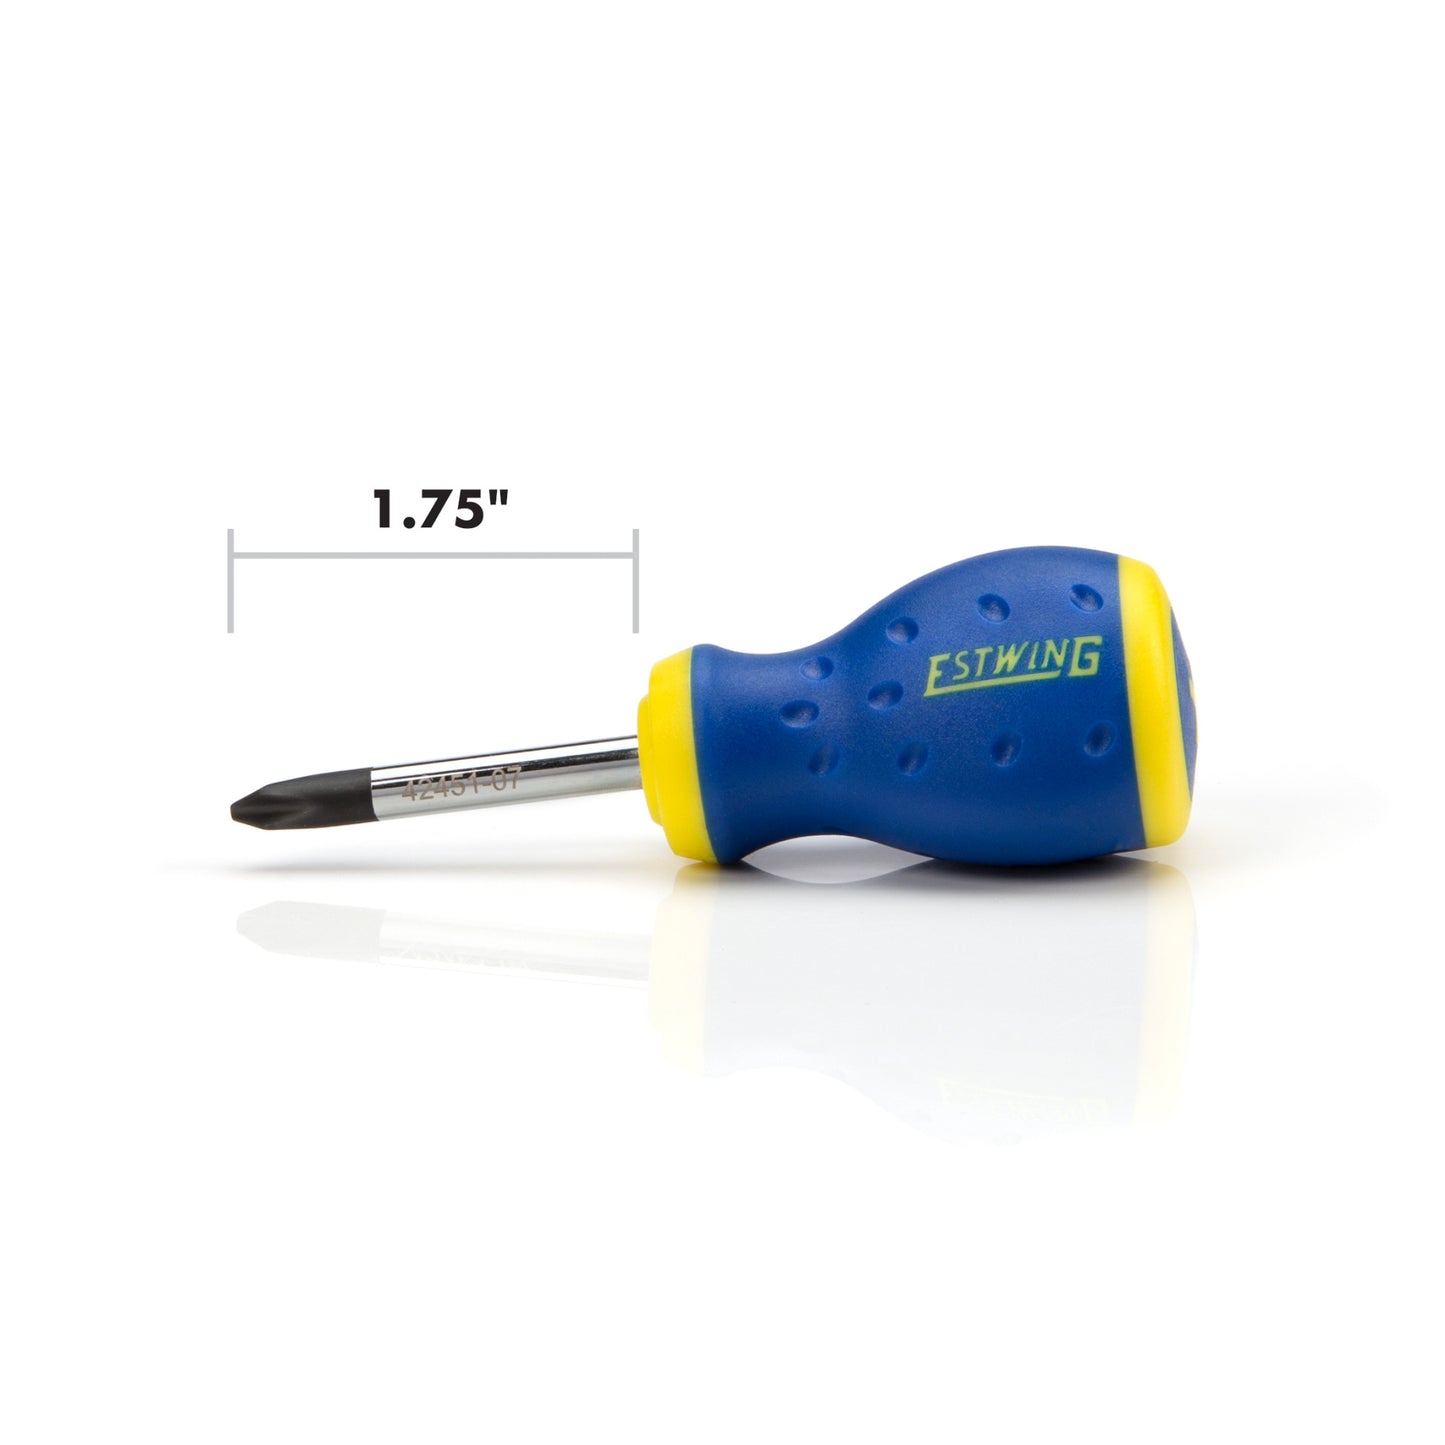 PH2 x 1-3/4-Inch Magnetic Philips Tip Stubby Screwdriver with Ergonomic Handle